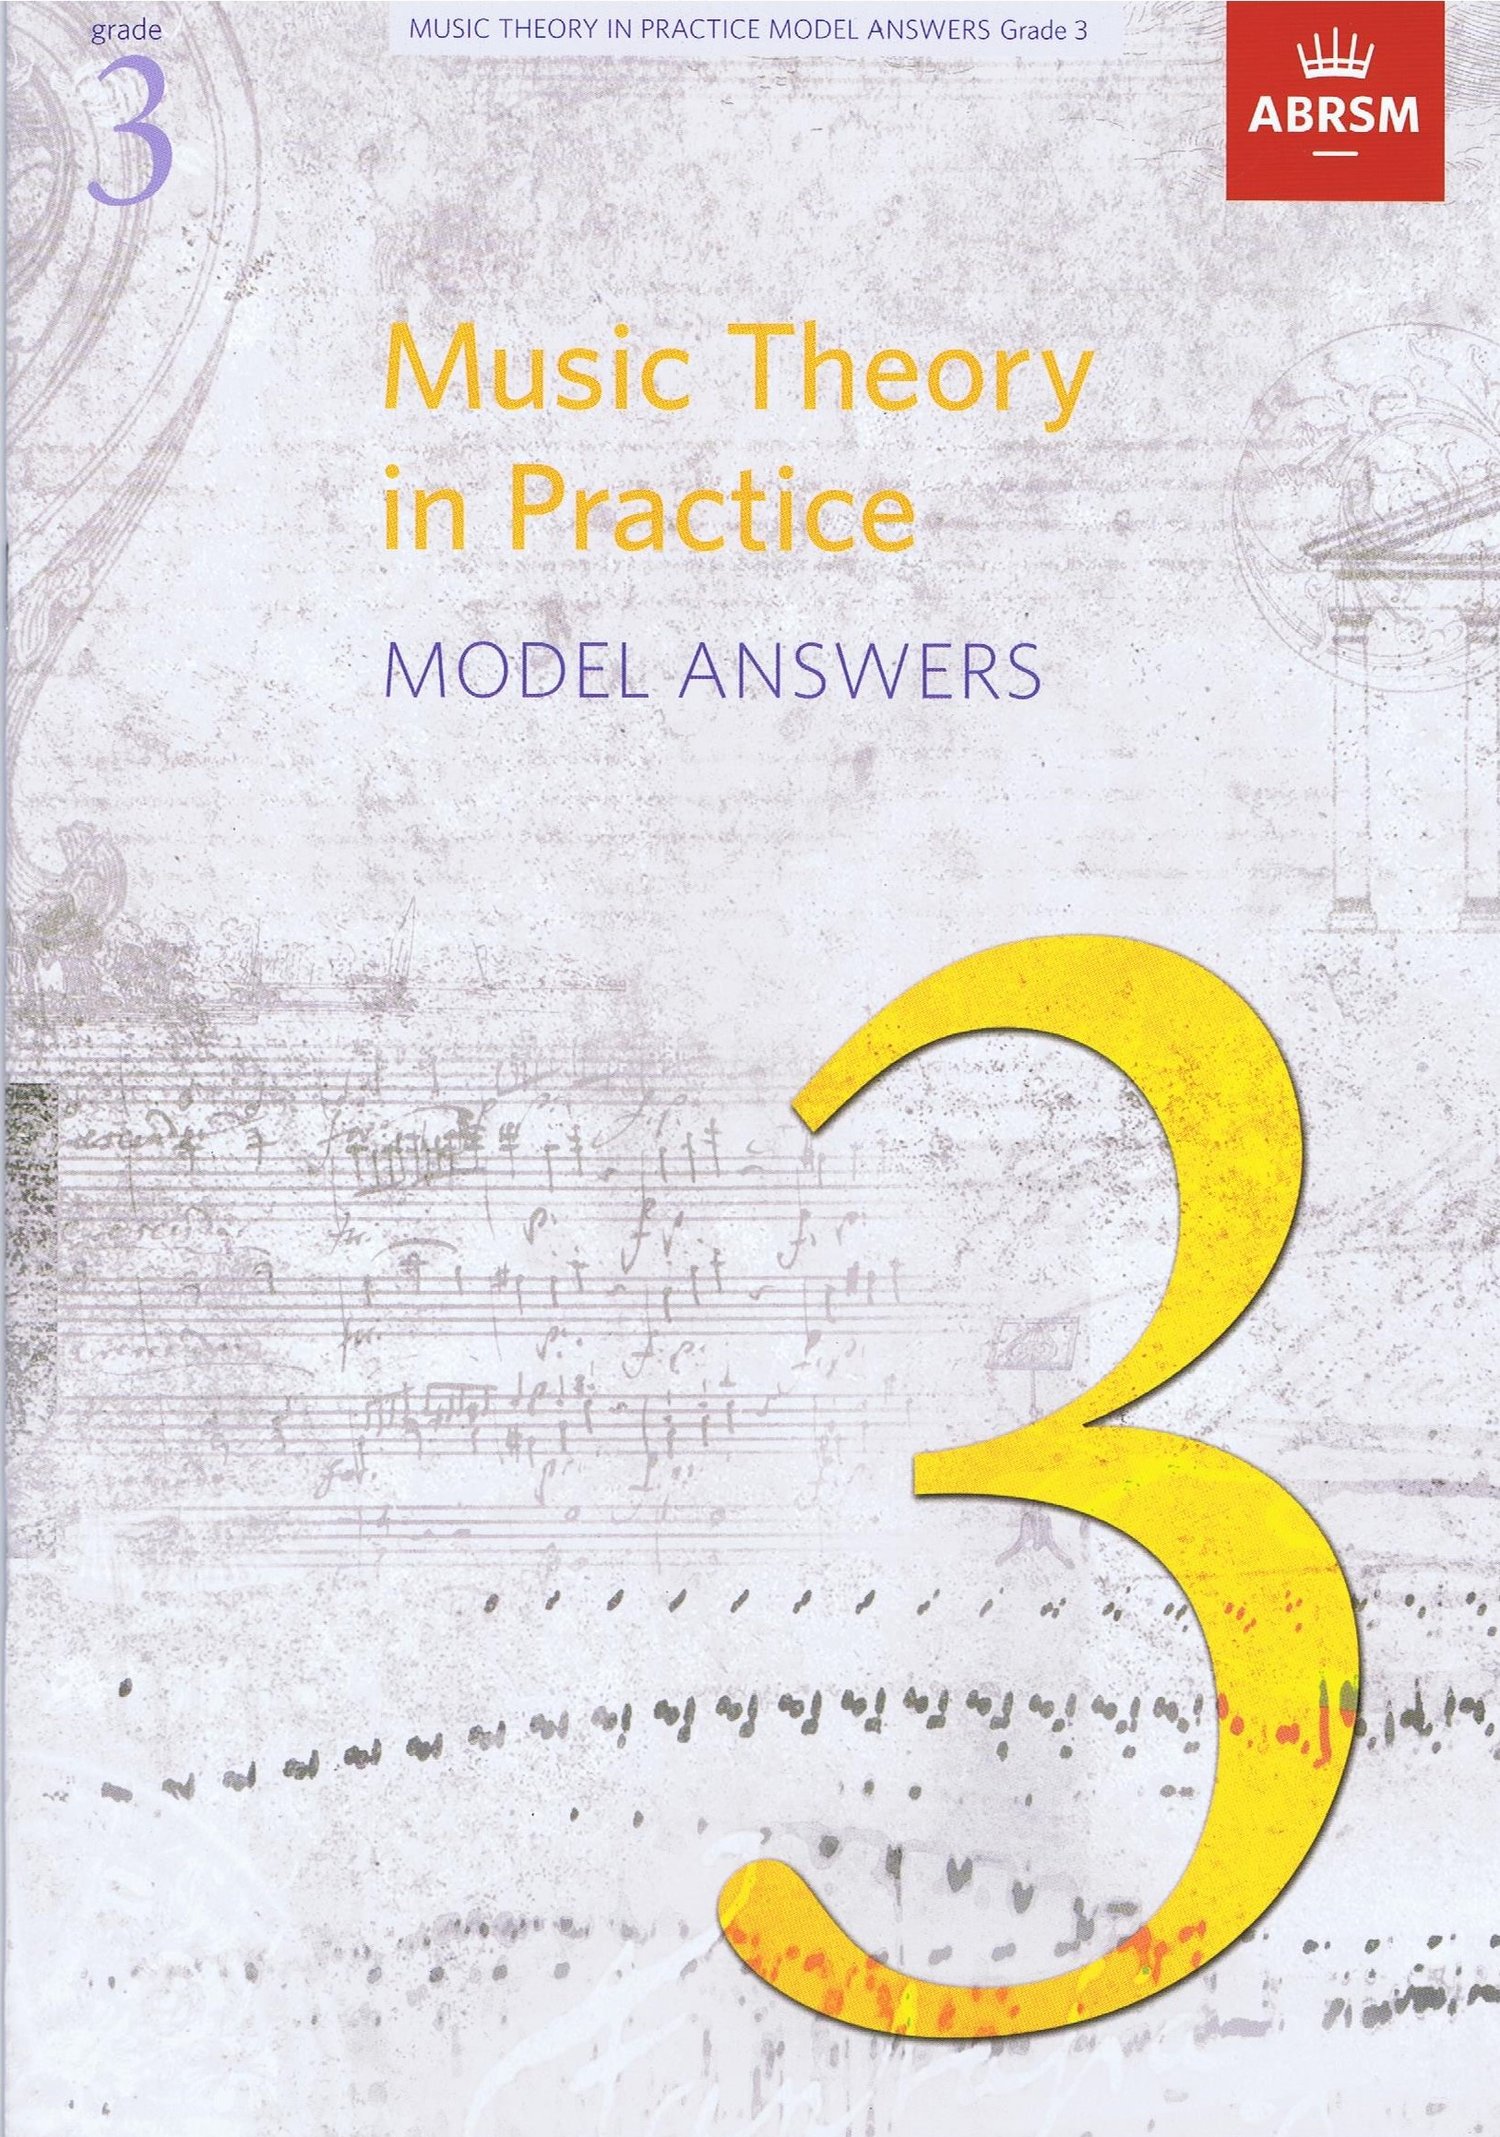 Music theory. Music Theory in Practice Grade 1. ABRSM.